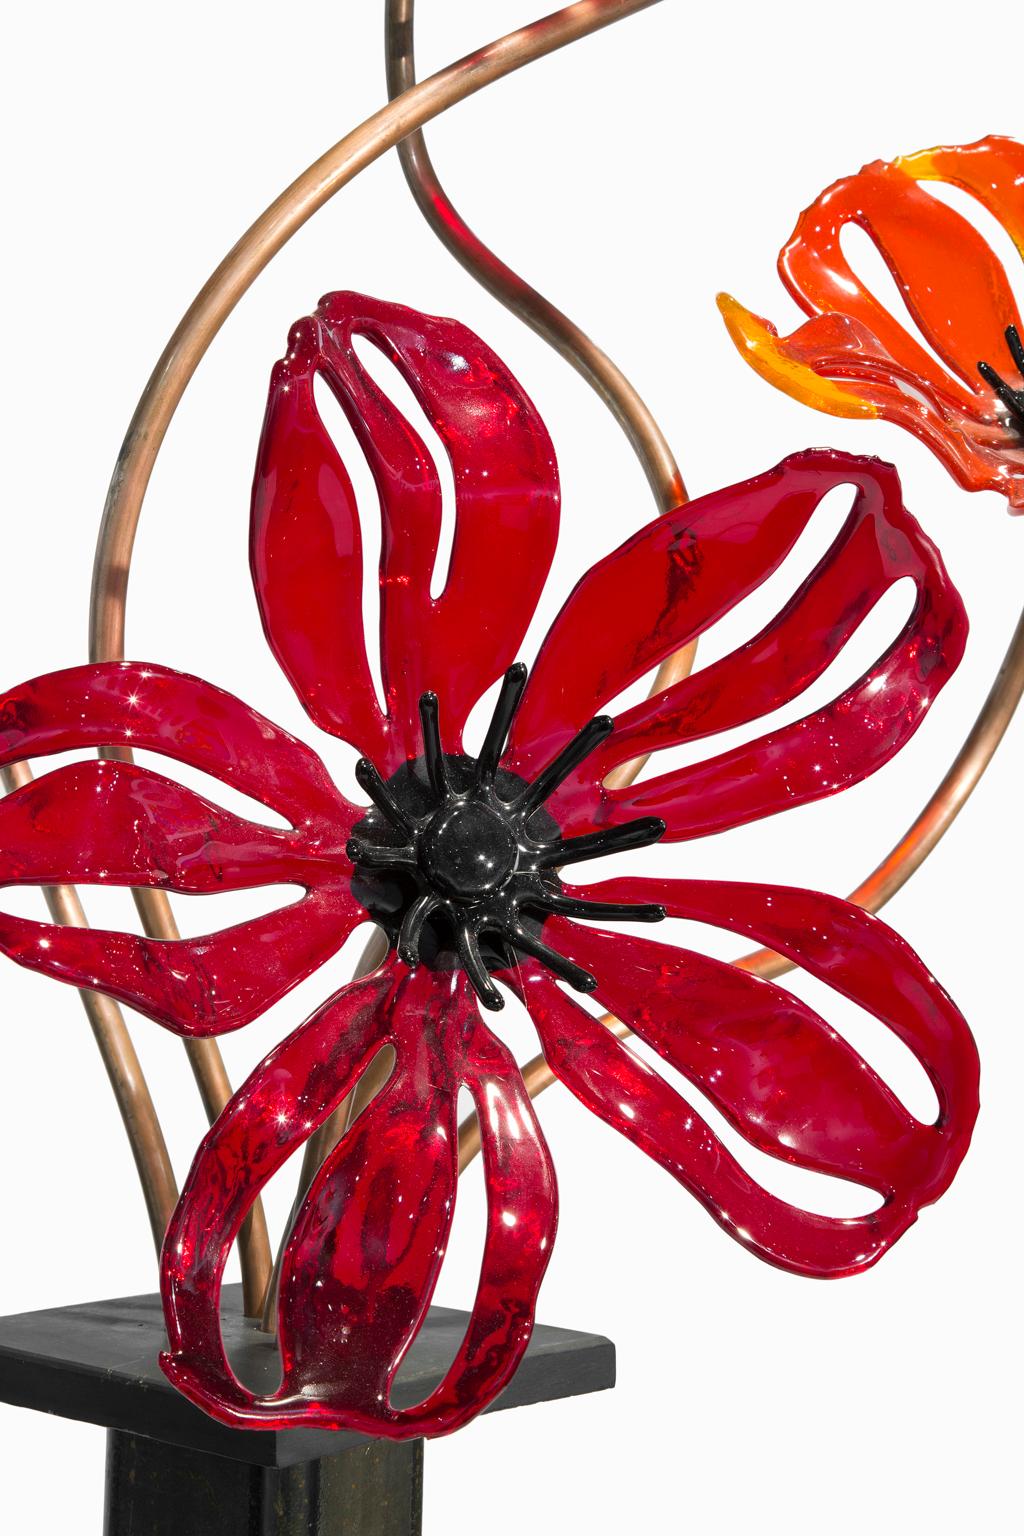 “Poppies” is a poetic interpretation of a garden flower rendered in exquisite colored glass by Craig Mitchell Smith. Craig is an extraordinary glass artist who is currently active in his Lansing, Michigan studio. He has changed the way we think